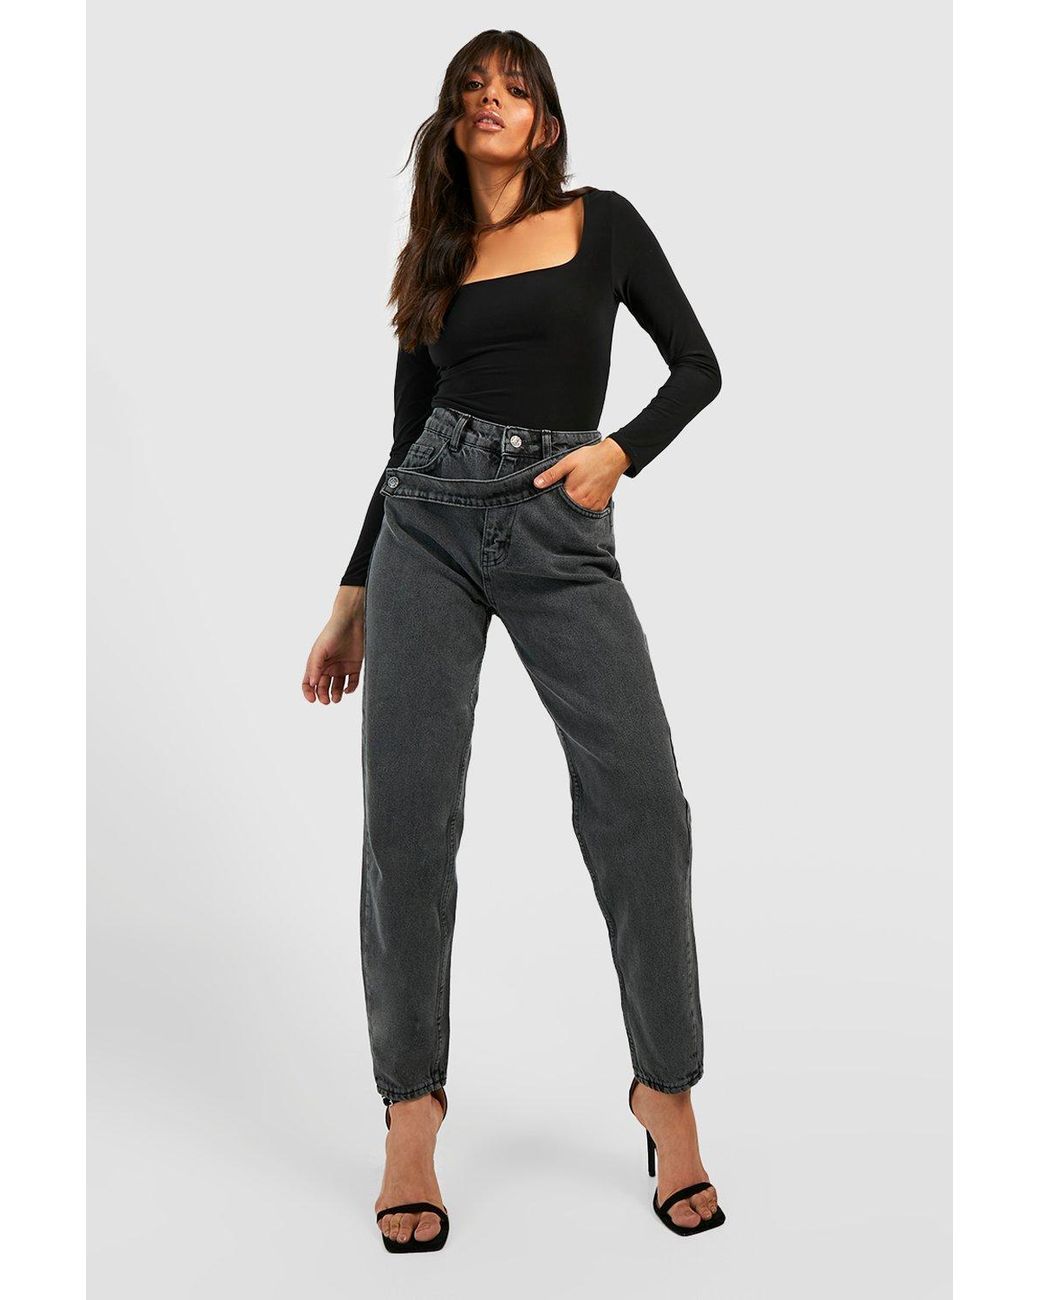 Boohoo Asymmetric Belted High Waisted Mom Jeans in Black | Lyst